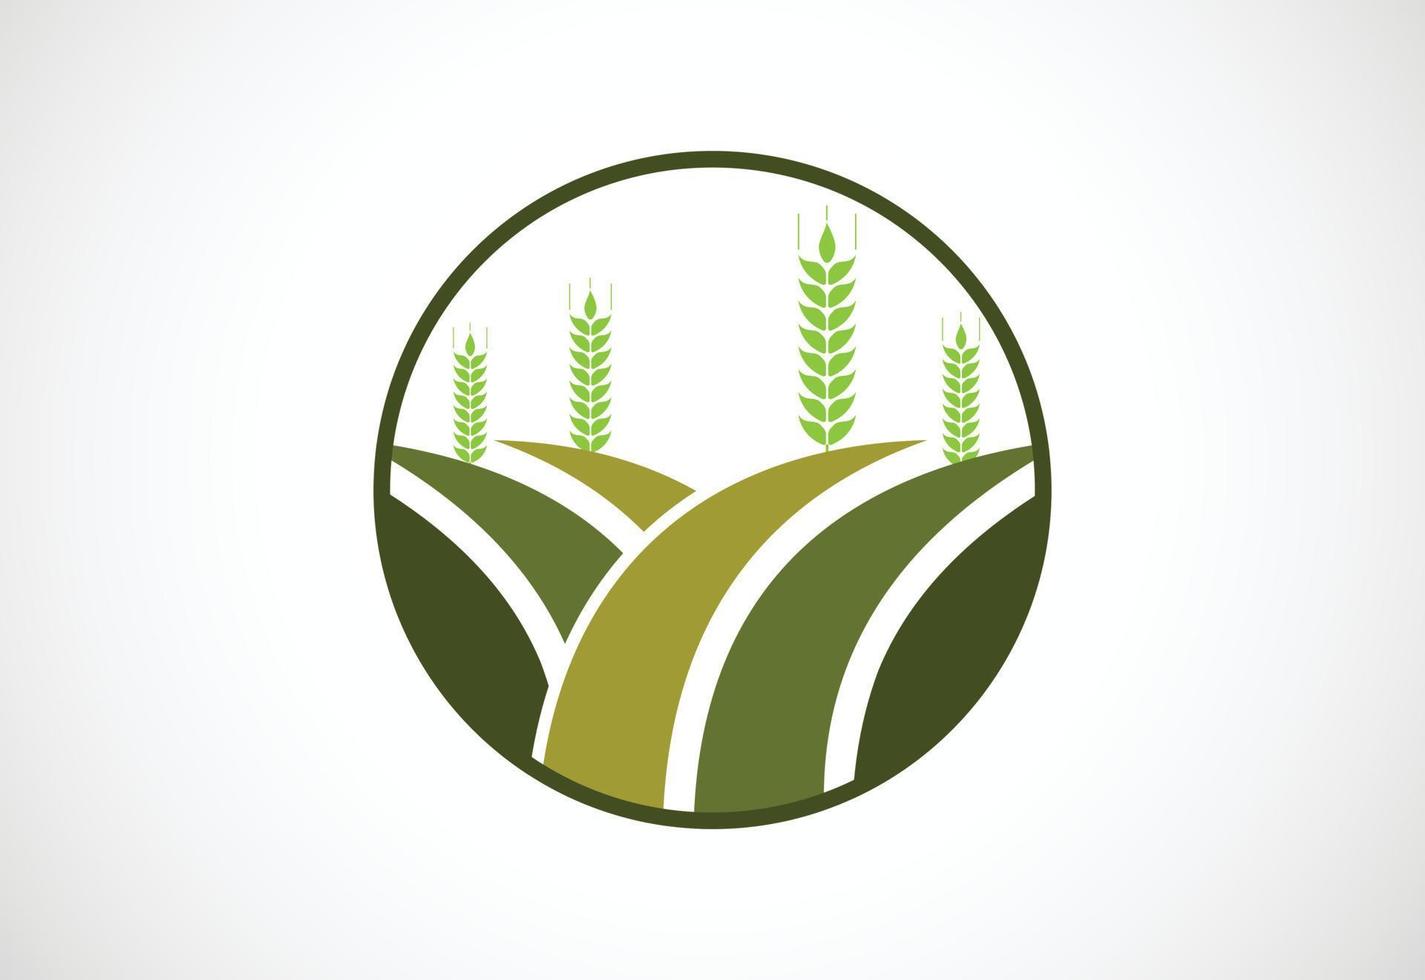 Creative Agriculture, agronomy, wheat farm, rural country farming field, natural harvest logo design, Vector design template